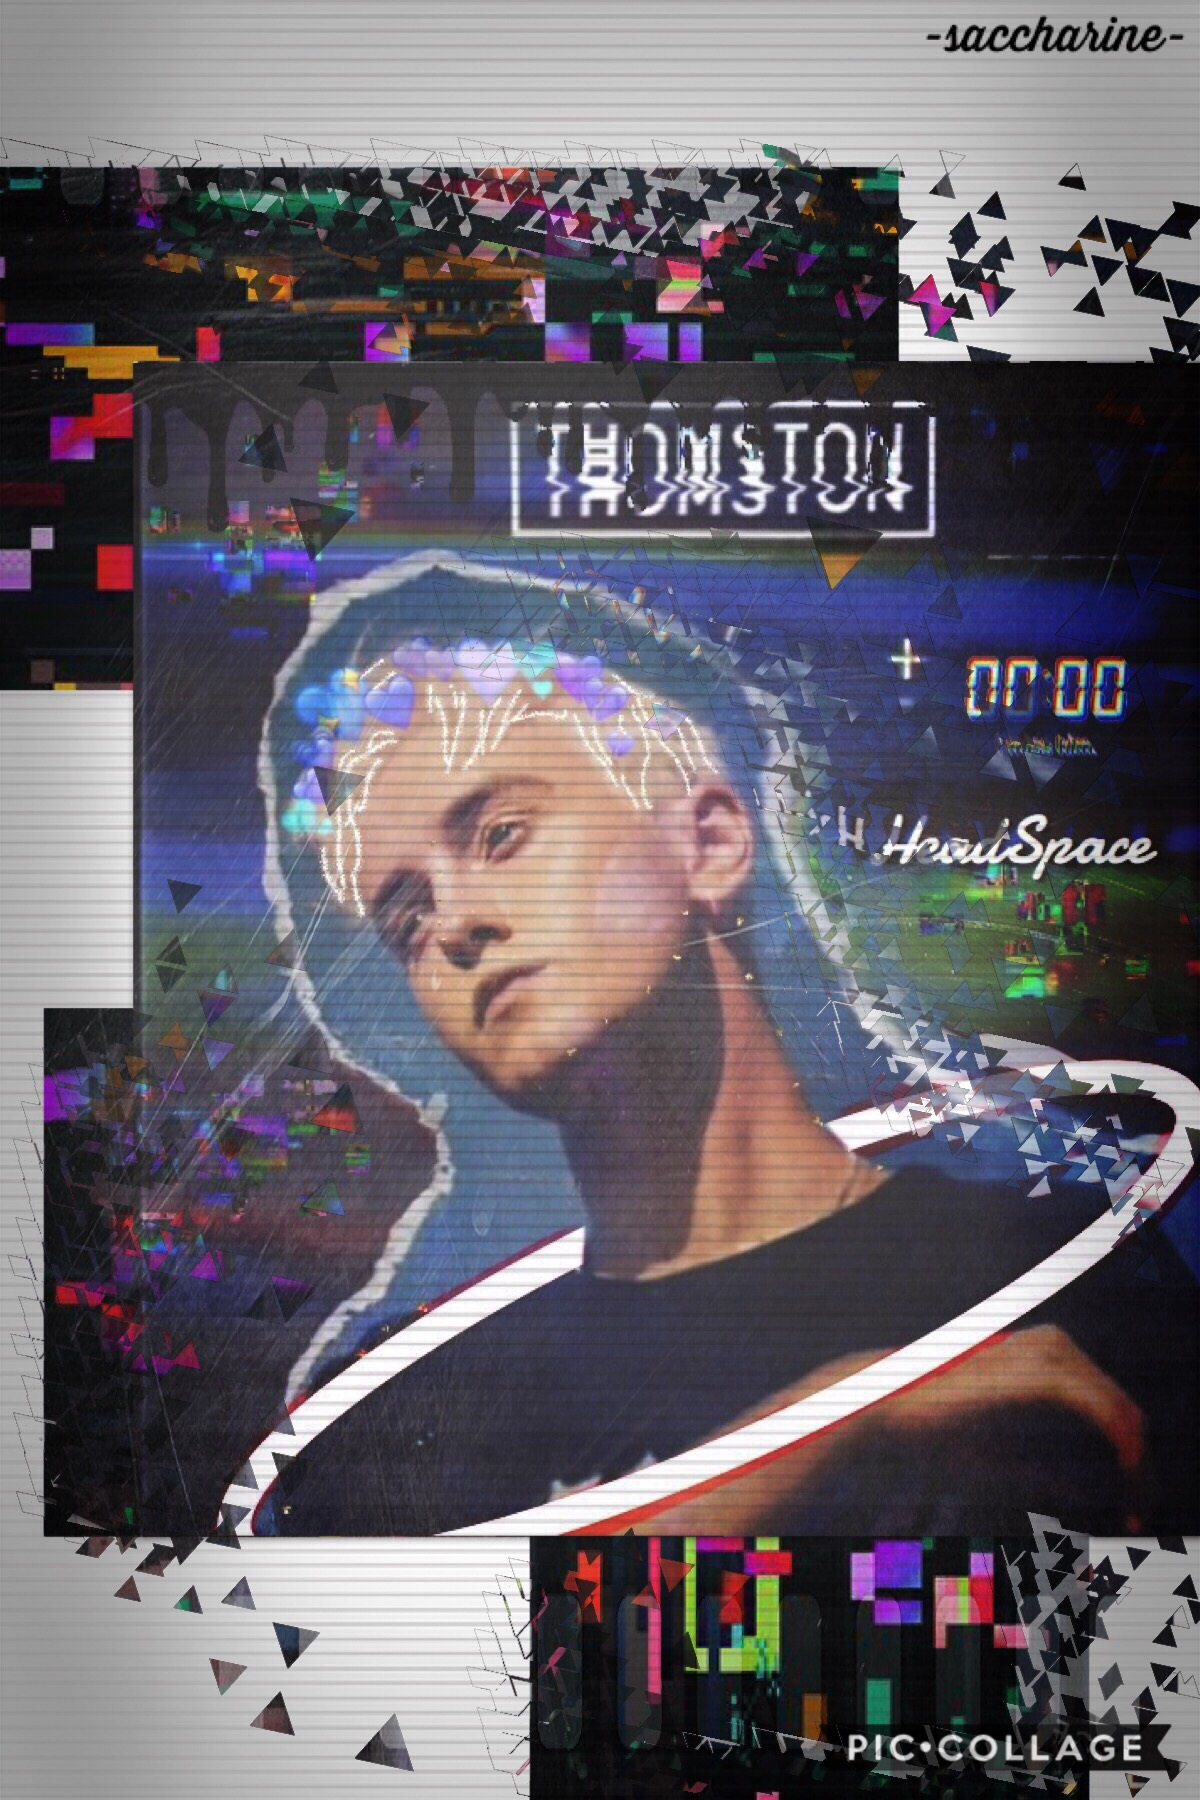 💜Hello💜
My beautiful people. I know I have been inactive lately. Sorry. But anyways, HeadSpace by Thomston is amazing. Here is an edit of it.✨